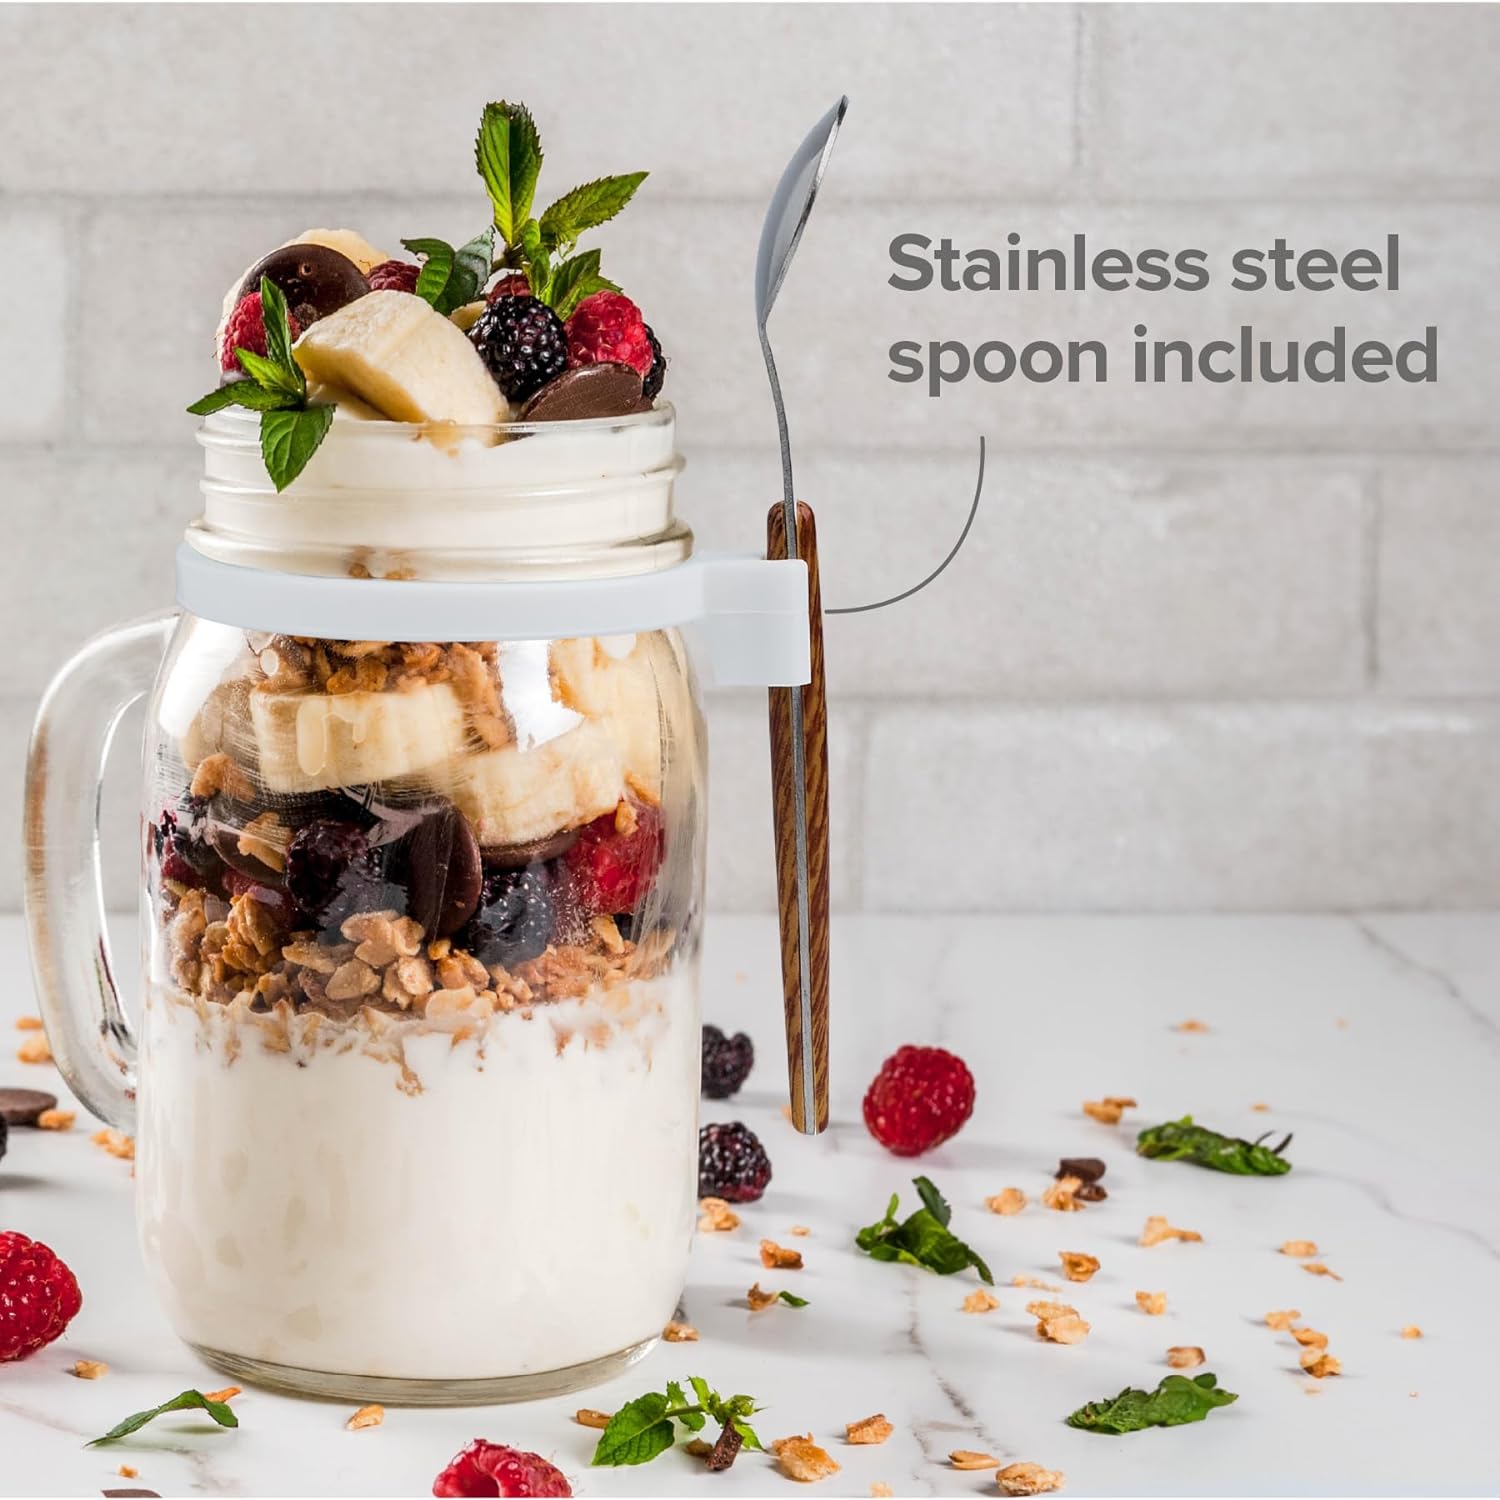 a jar of yogurt with fruit and berries with text: 'Stainless steel spoon included'